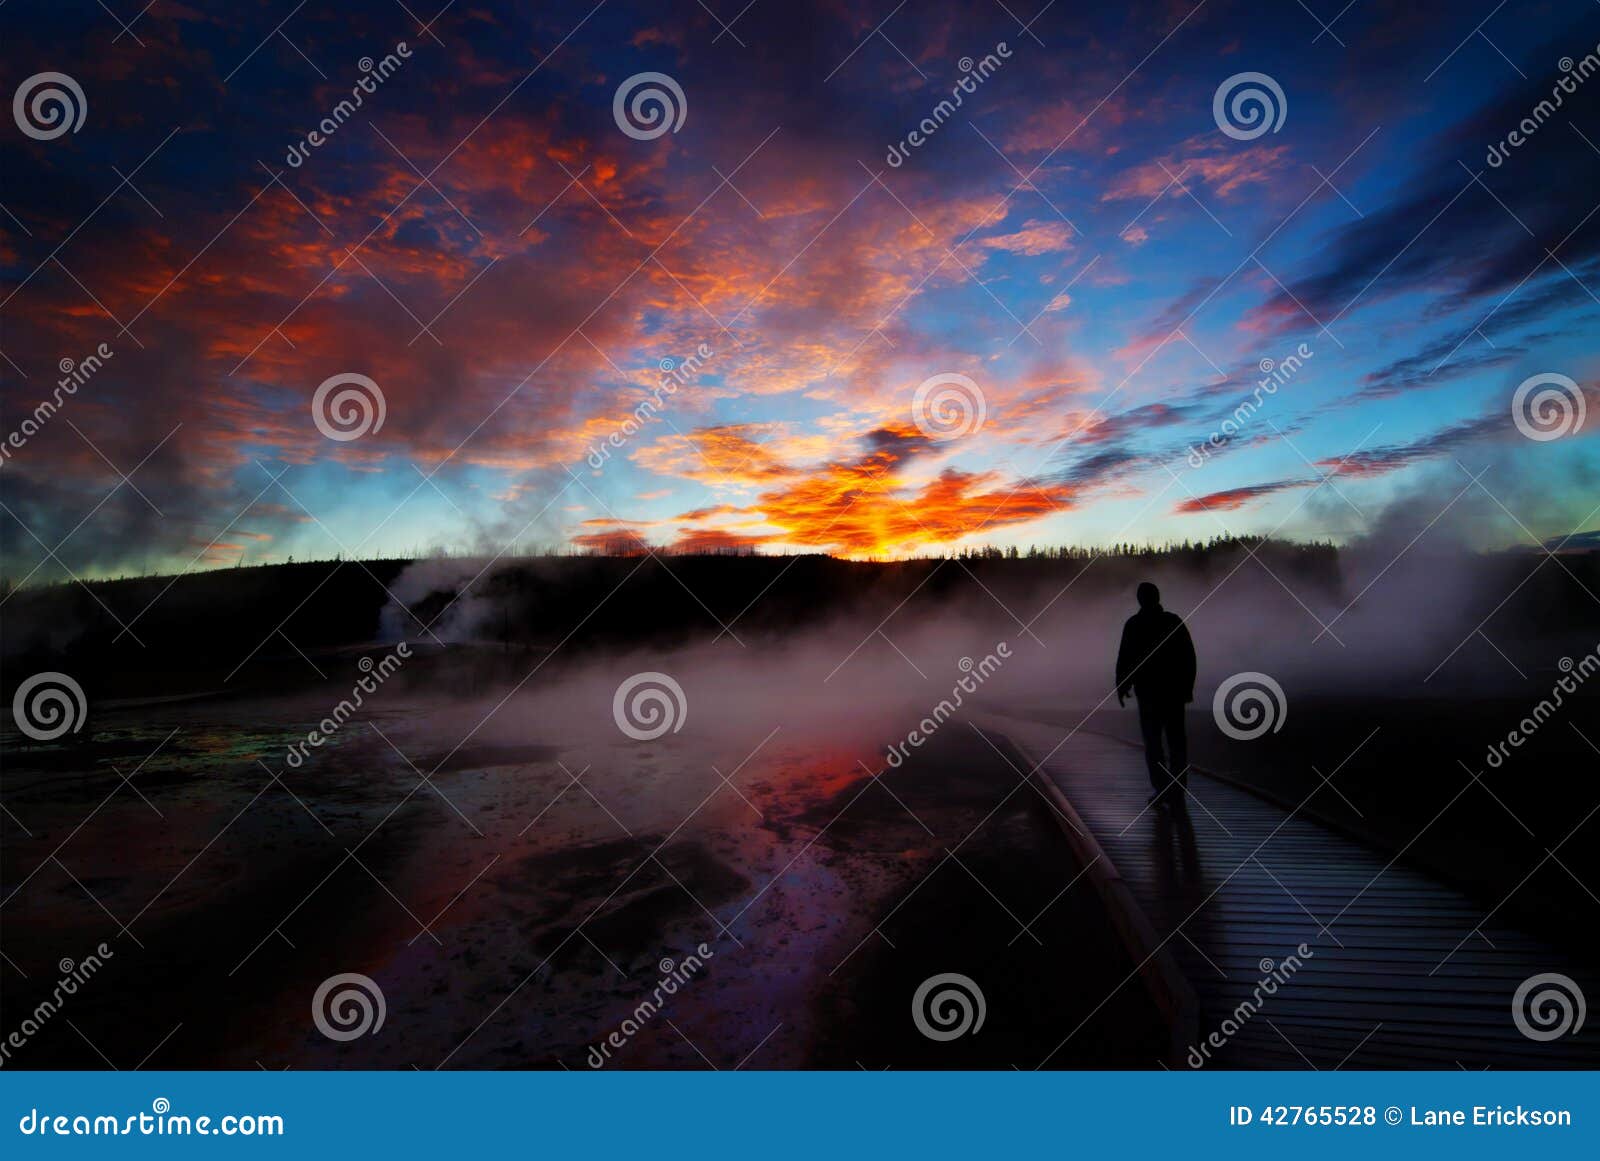 sunrise yellowstone geysers with man silhouetted